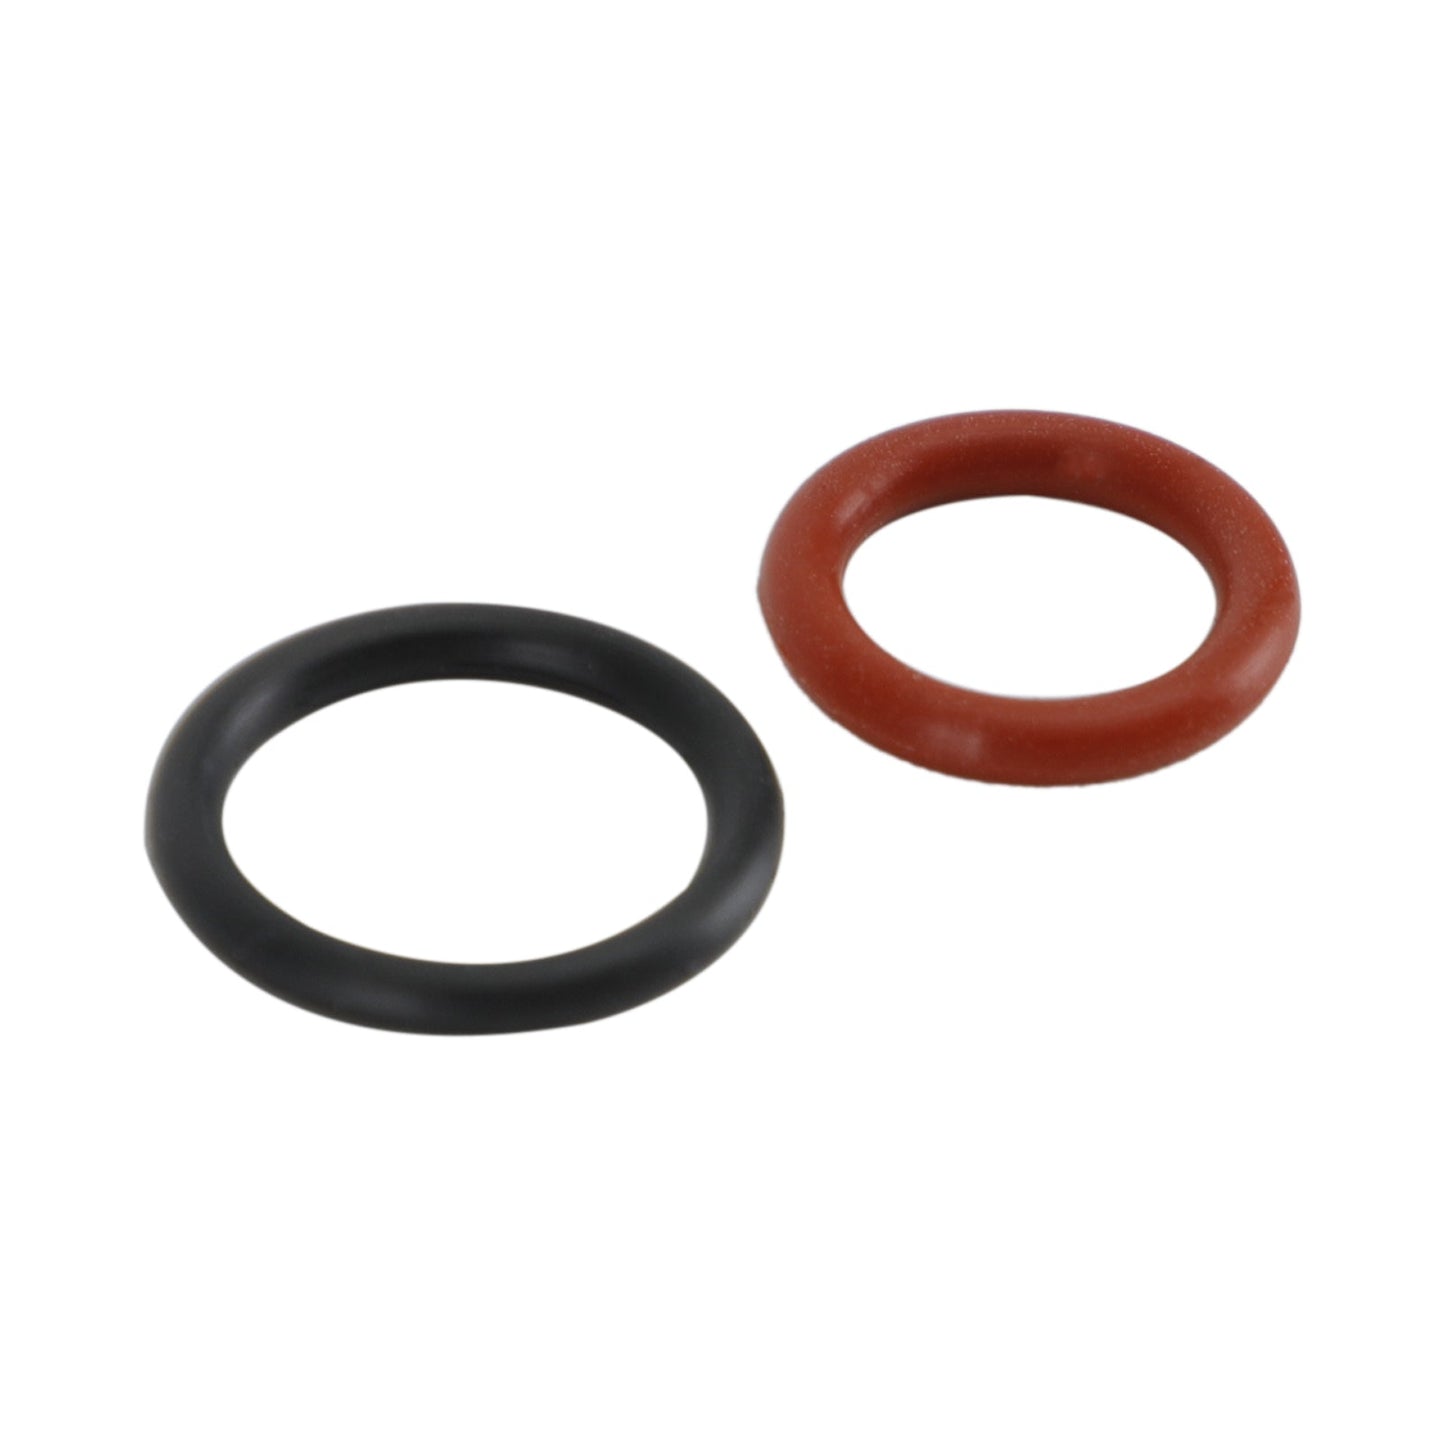 2PCS Power Steering Pump Rubber Inlet & Outlet O-Ring Seals Fit Acura Fit Honda